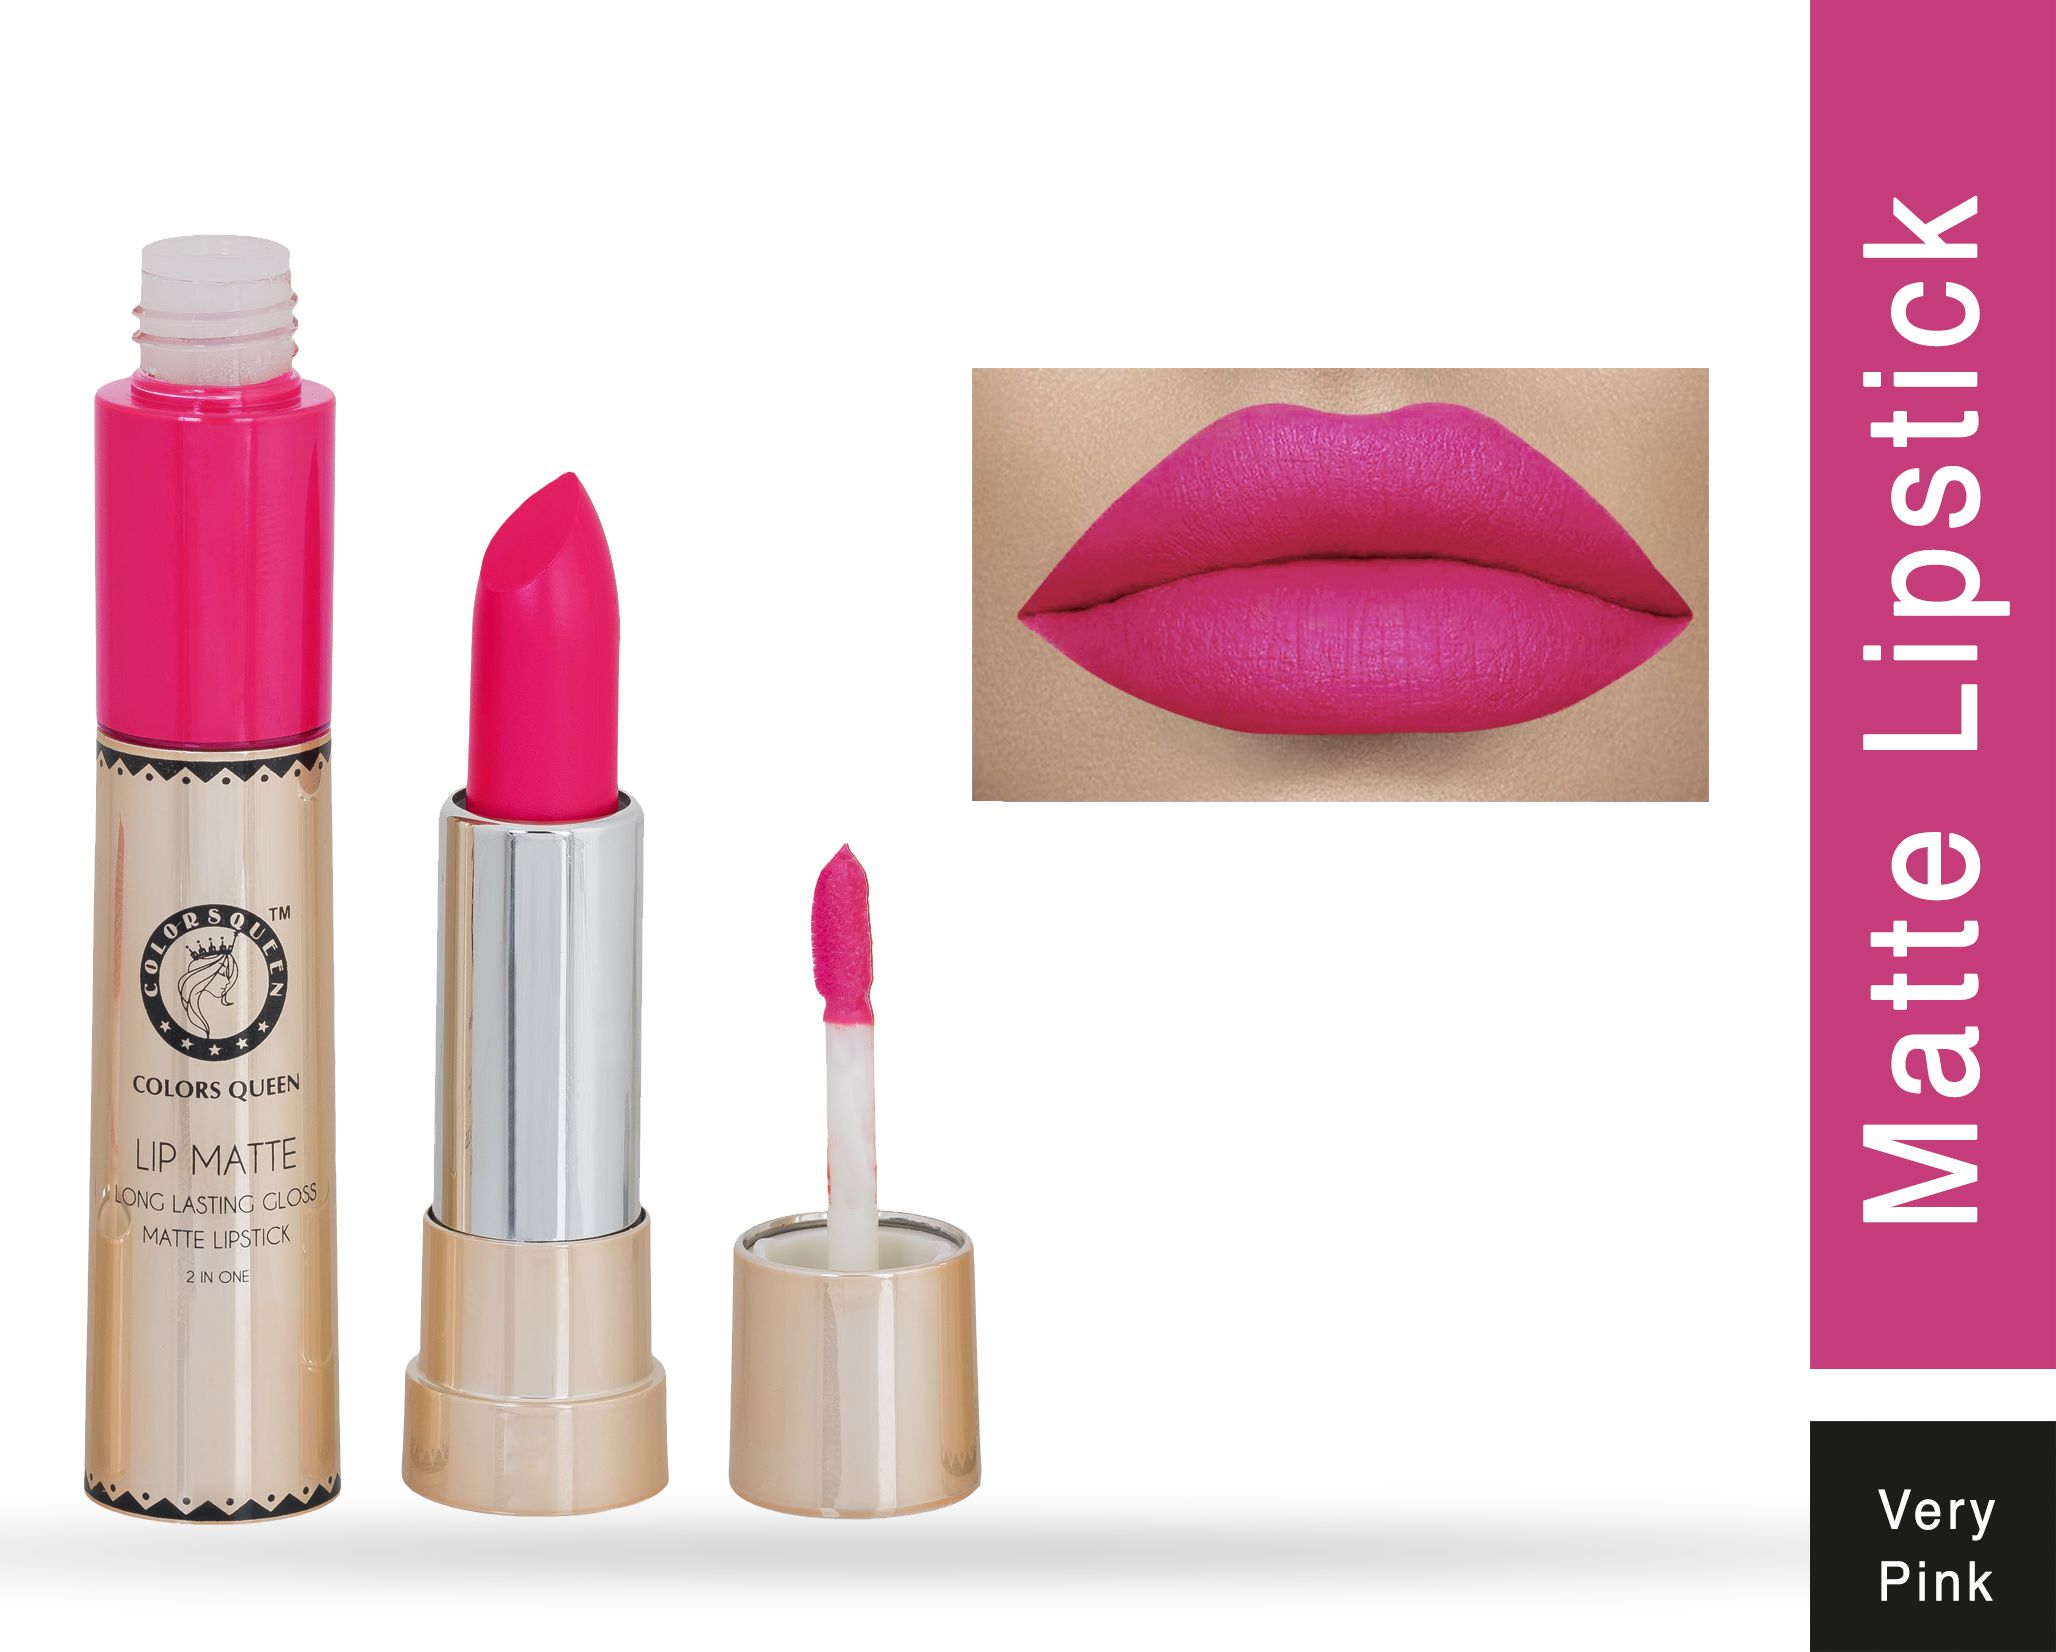     			Colors Queen 2 in 1 Lipstick Very Pink Shade 02 | SPF 15 8 g